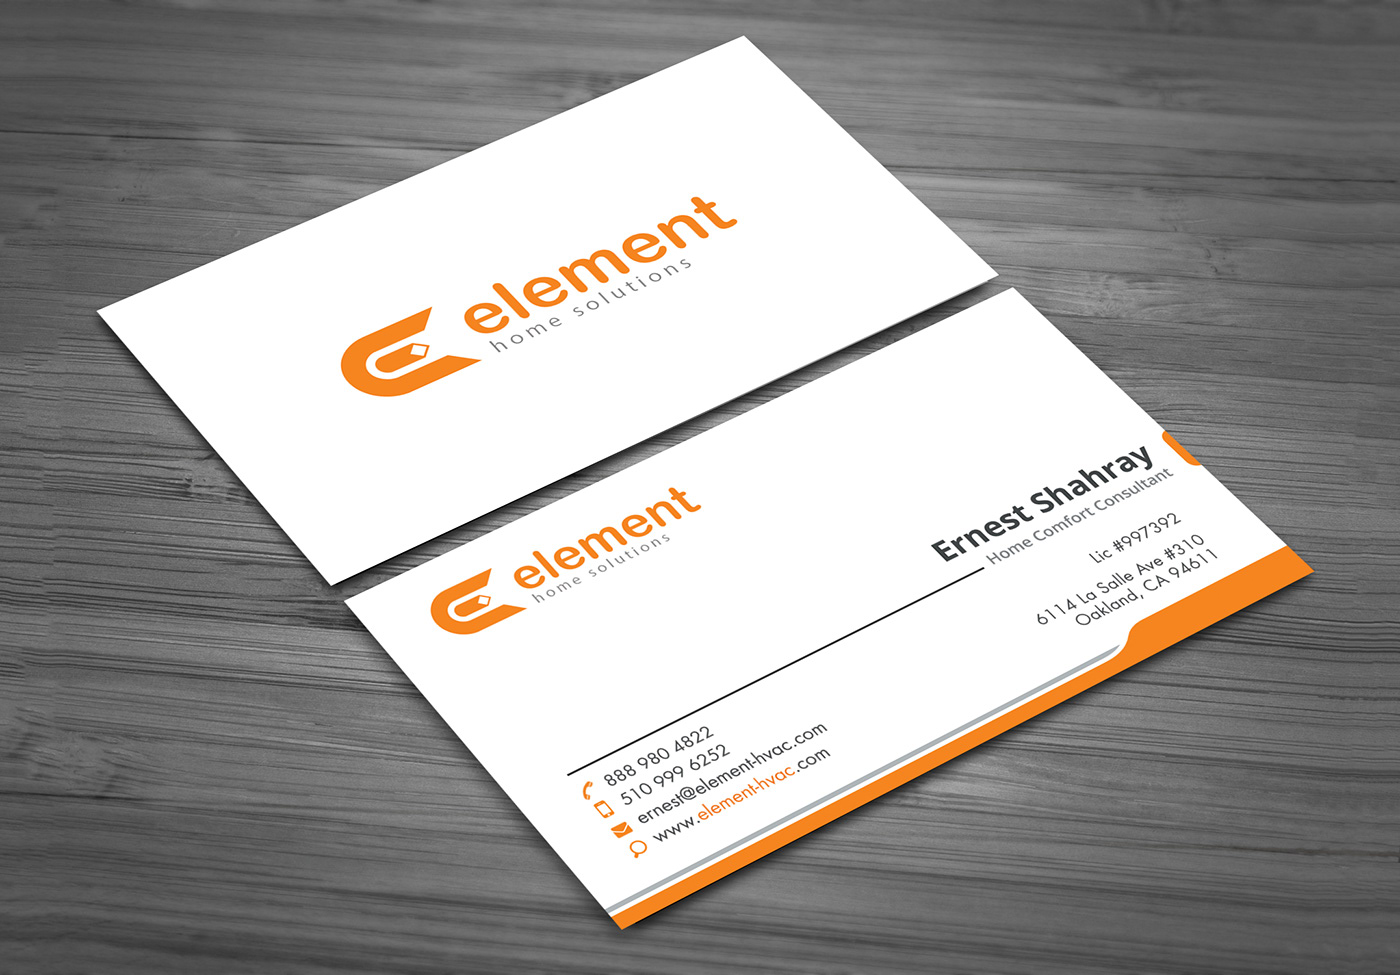 Business Card Mockup PSD file | Free Download Vol.2 on Behance